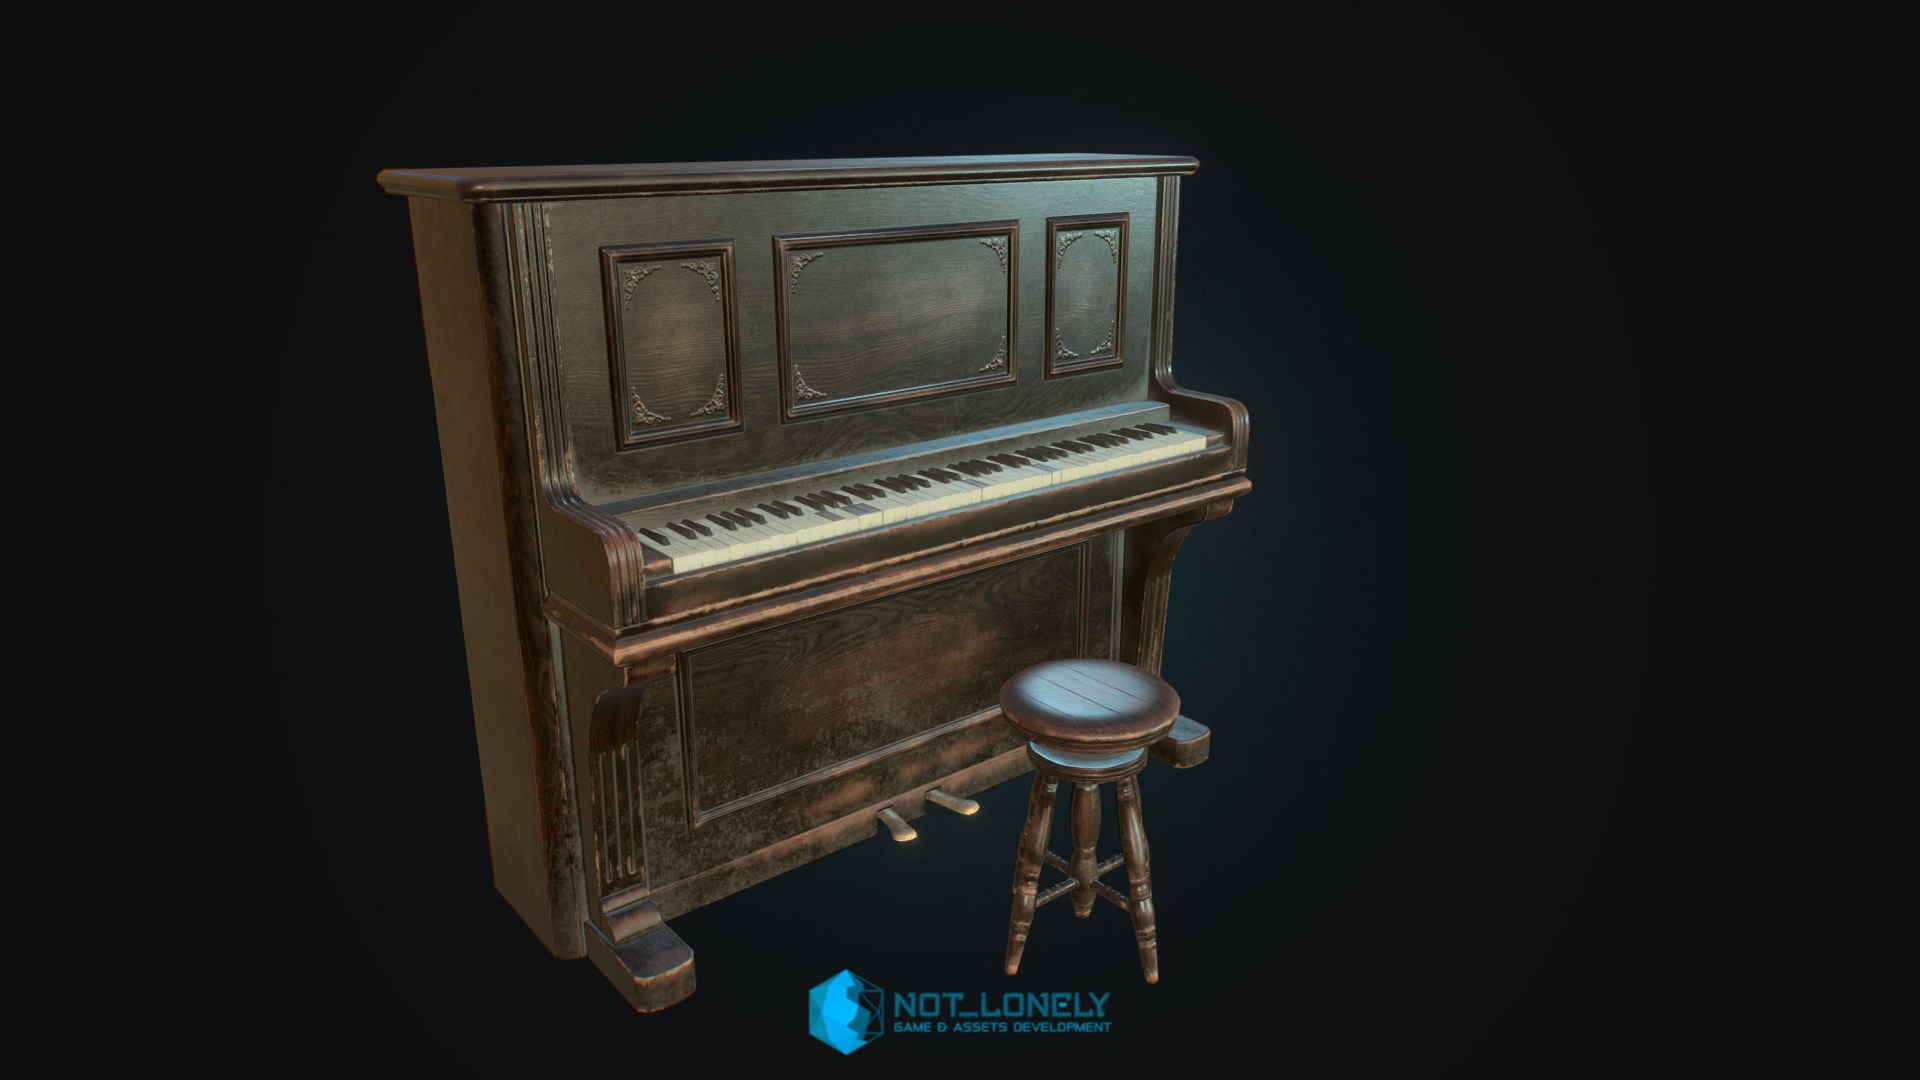 3D model Old Piano - This is a 3D model of the Old Piano. The 3D model is about a wooden chest with a seat.